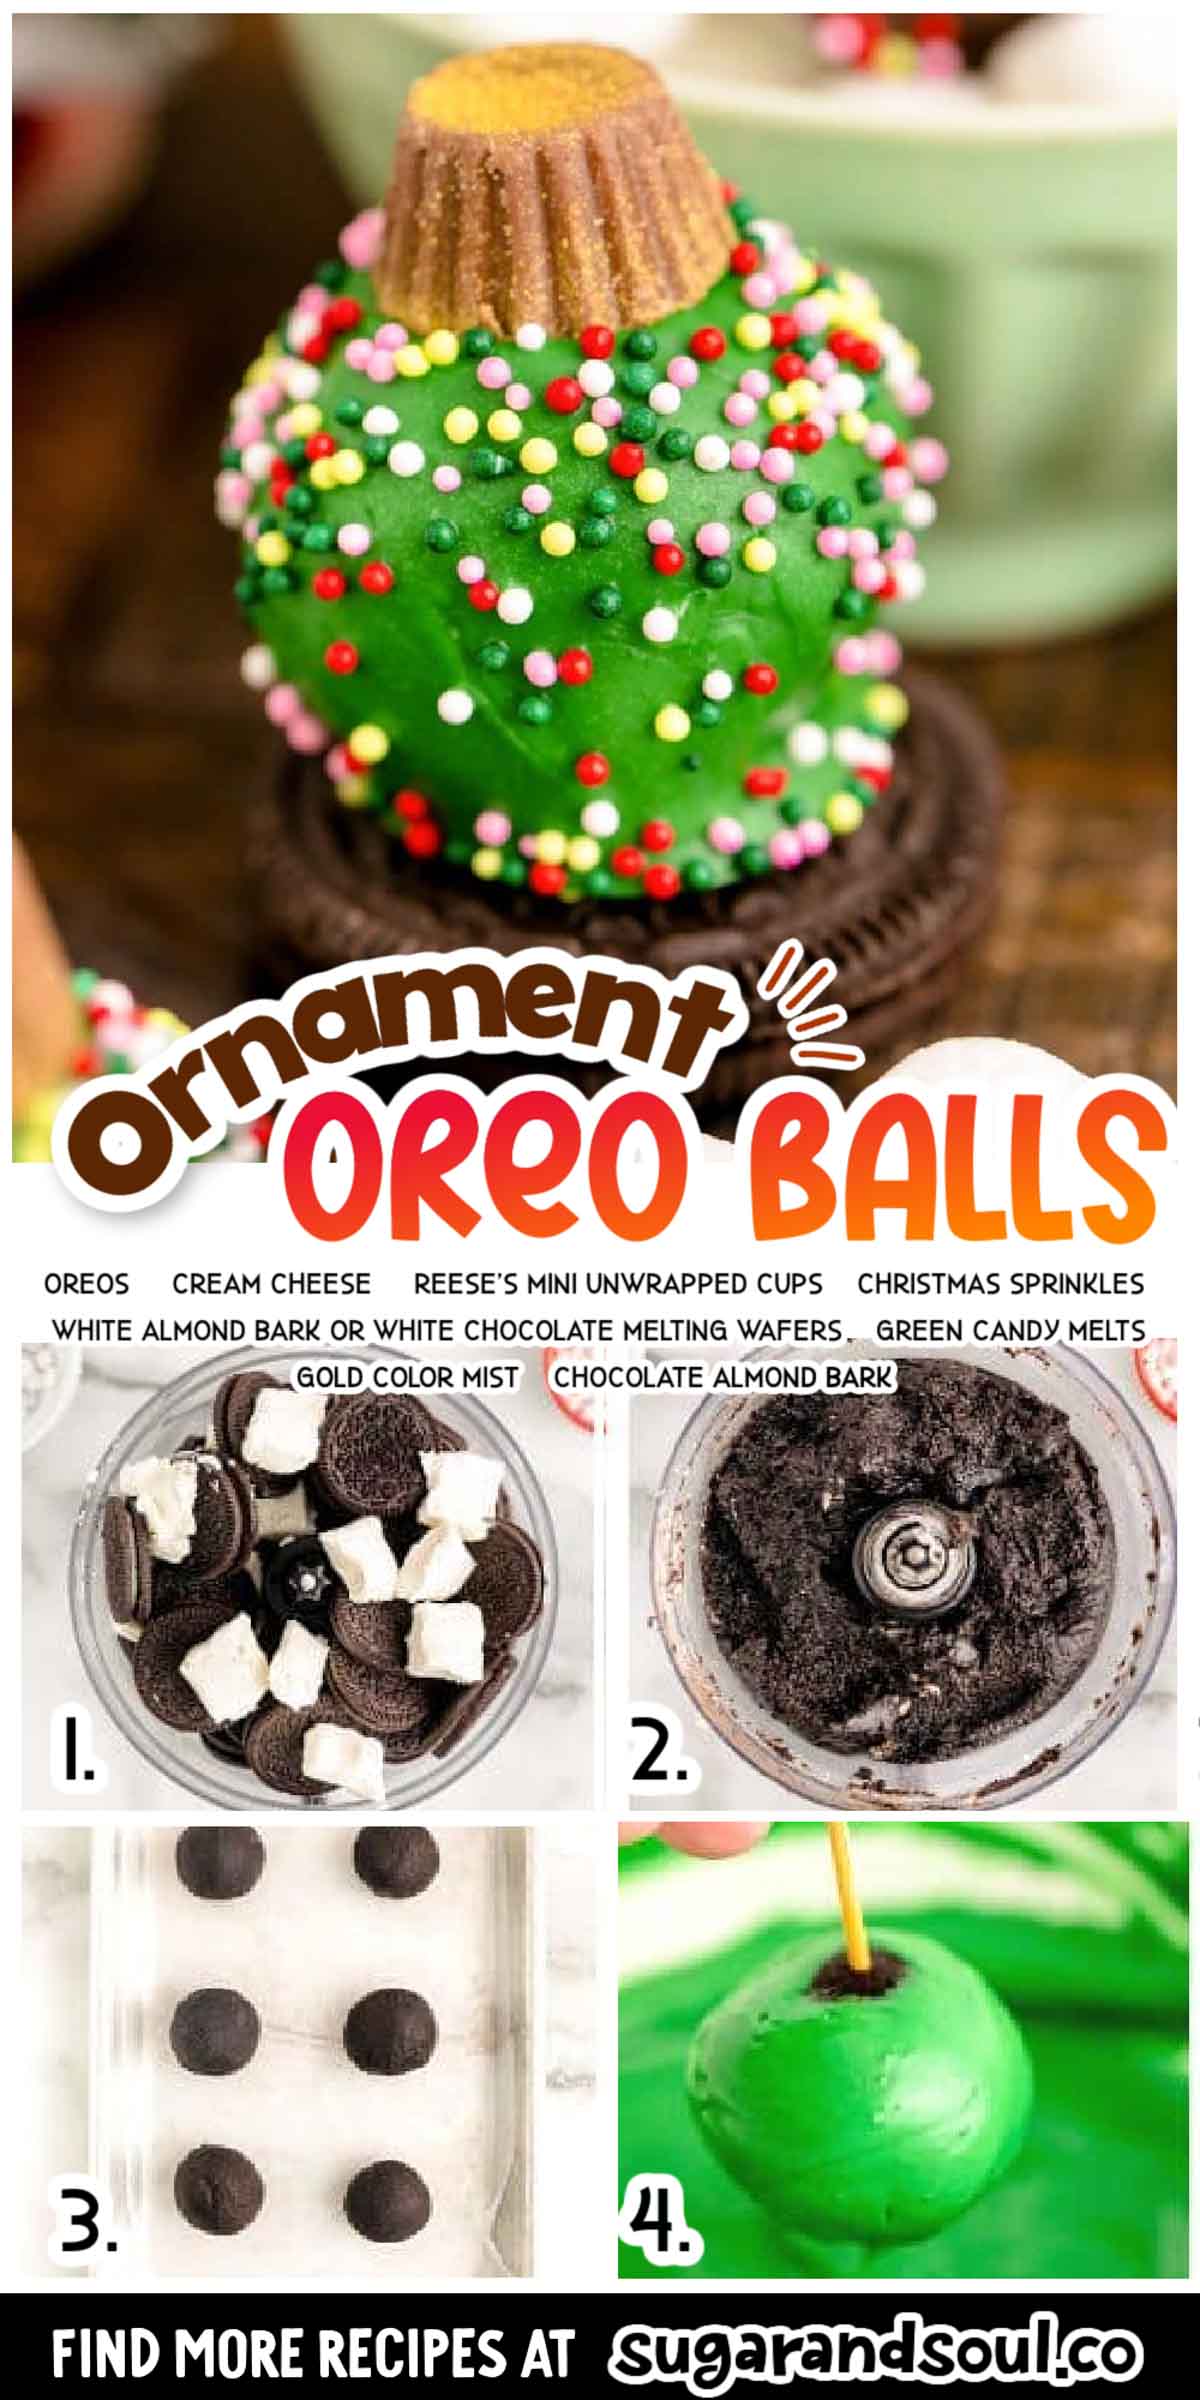 Oreo Ball Ornaments are fun, festive, no-bake treats that are made with only 4 ingredients and finished off with edible color spray and sprinkles! This is an exciting recipe that the whole family can make together! via @sugarandsoulco